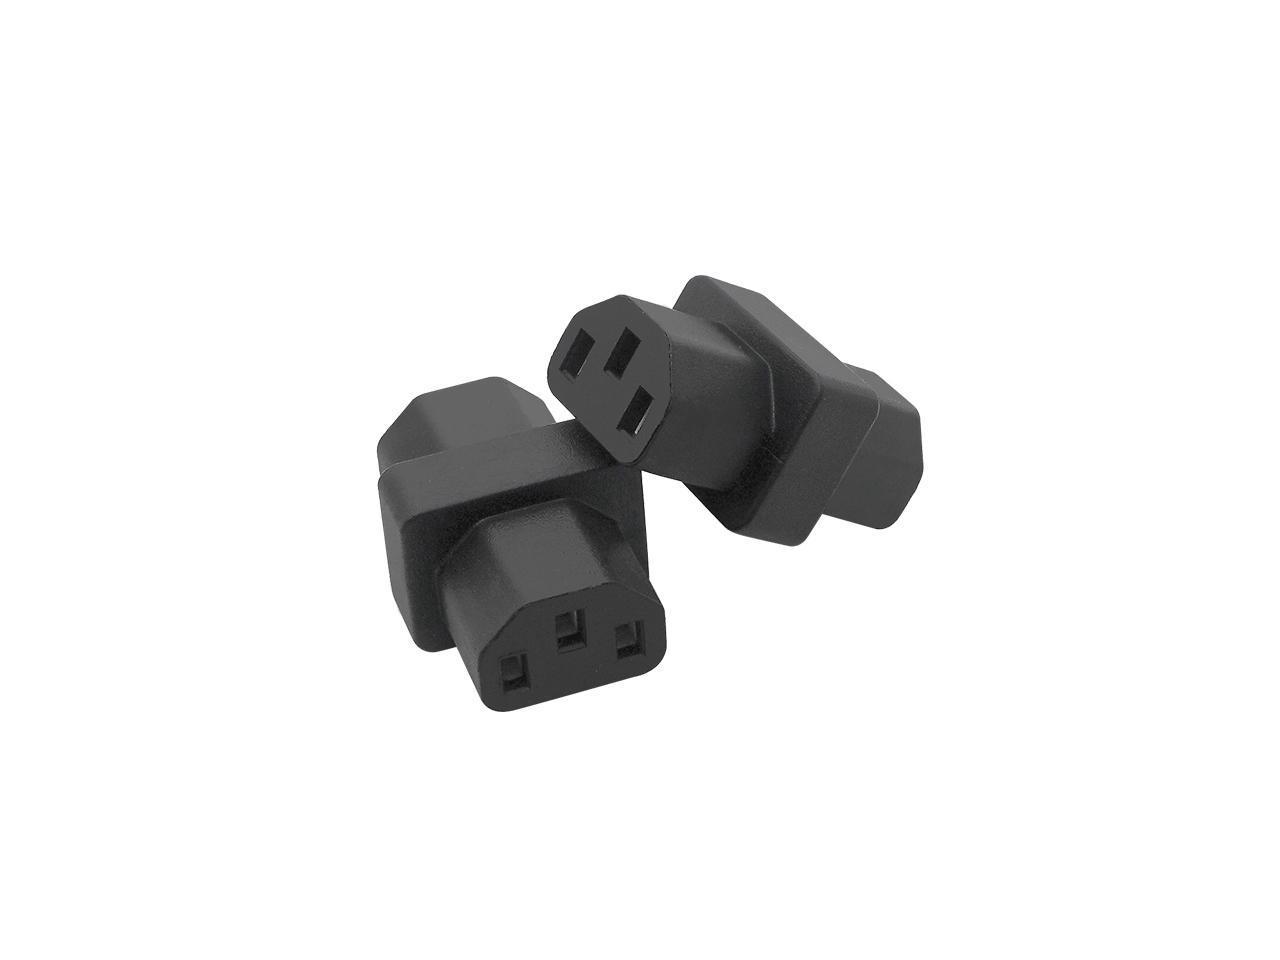 Details about   IEC 320 C13 Female Plug Adapter 3pin Socket Power Cord Rewirable ConnectorB QW 